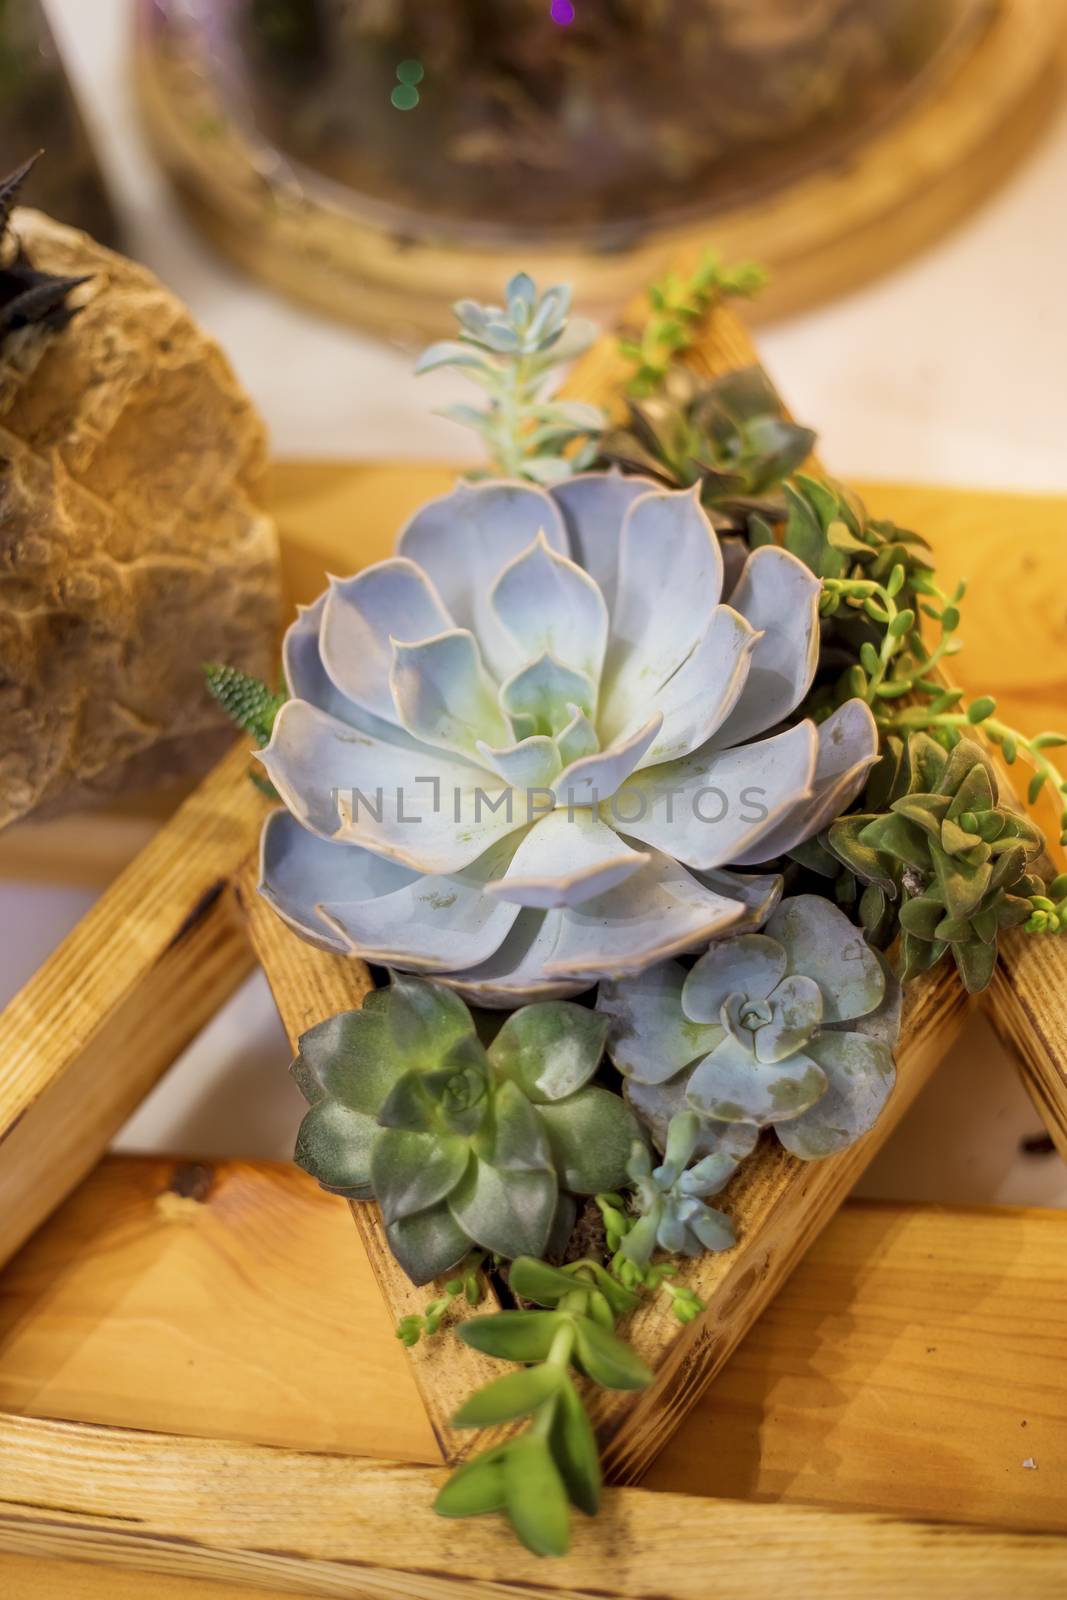 floristic composition of a variety of succulents in a wooden box pot by galinasharapova